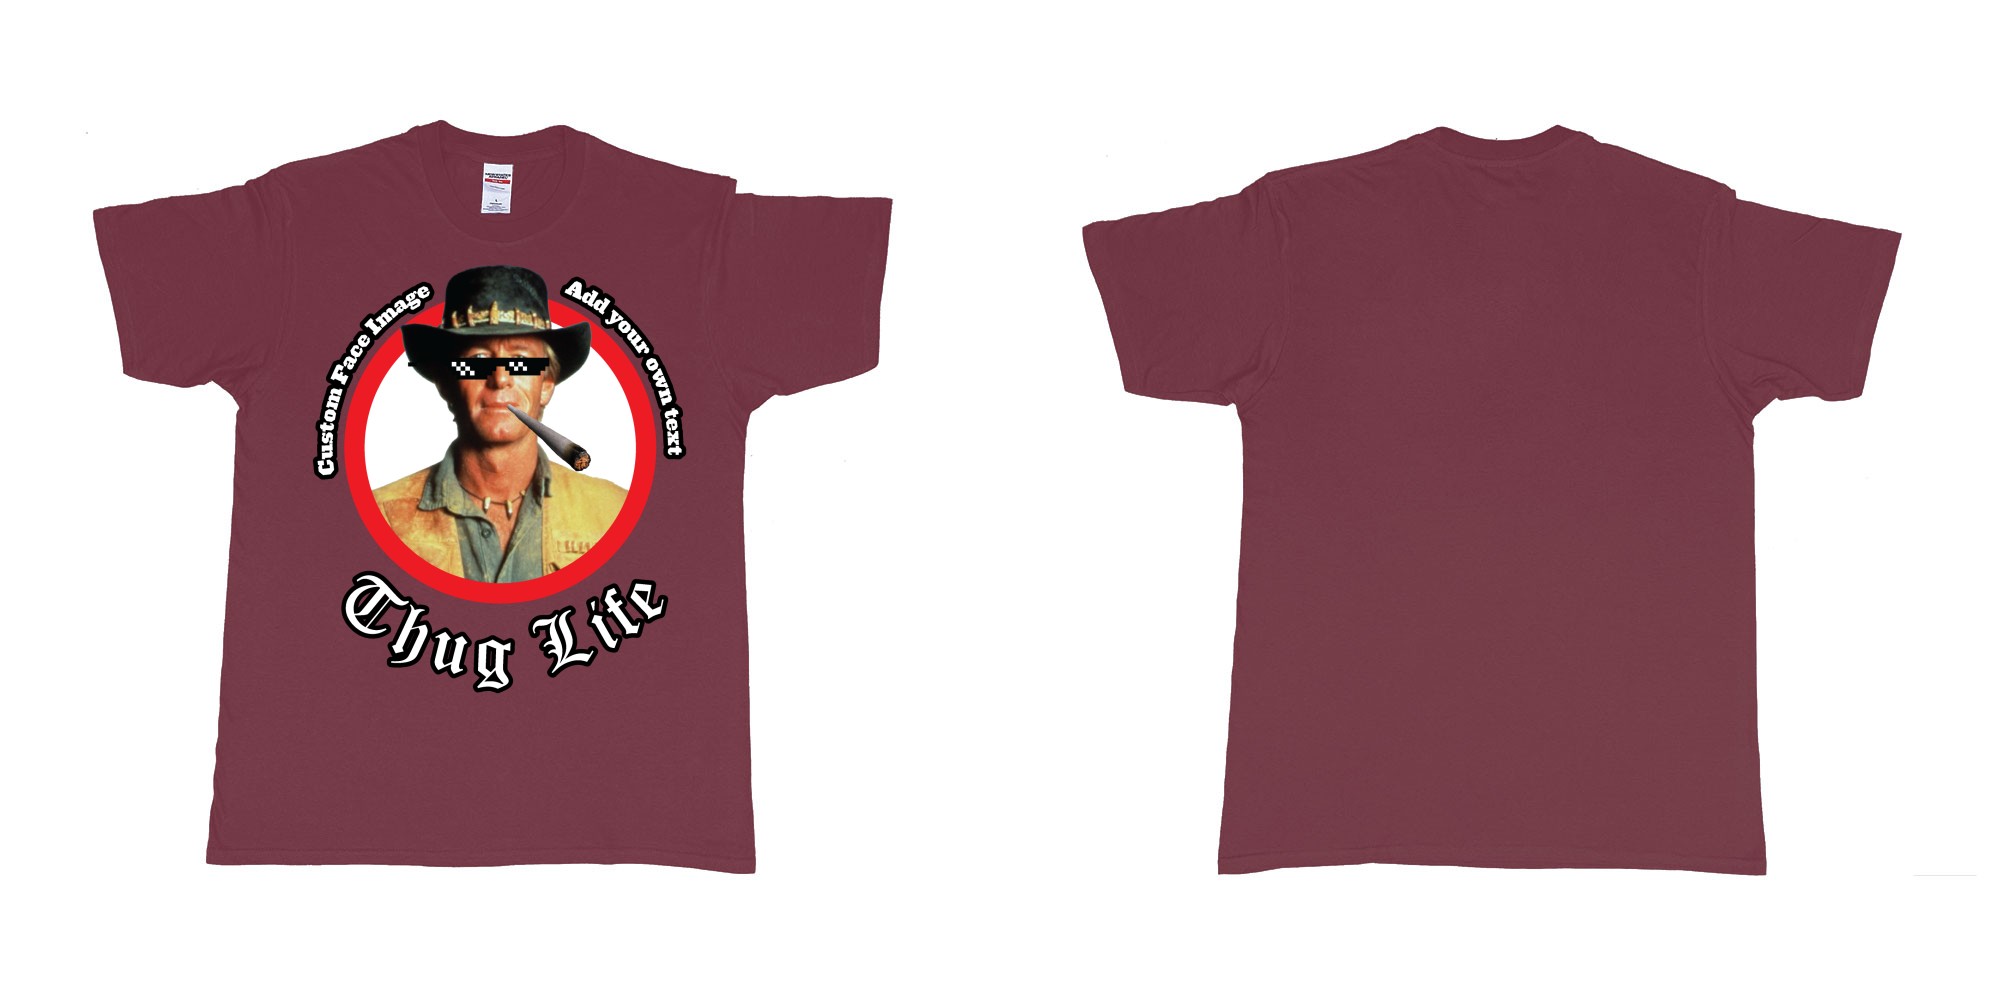 Custom tshirt design thug life meme sunglasses joint custom image in fabric color marron choice your own text made in Bali by The Pirate Way